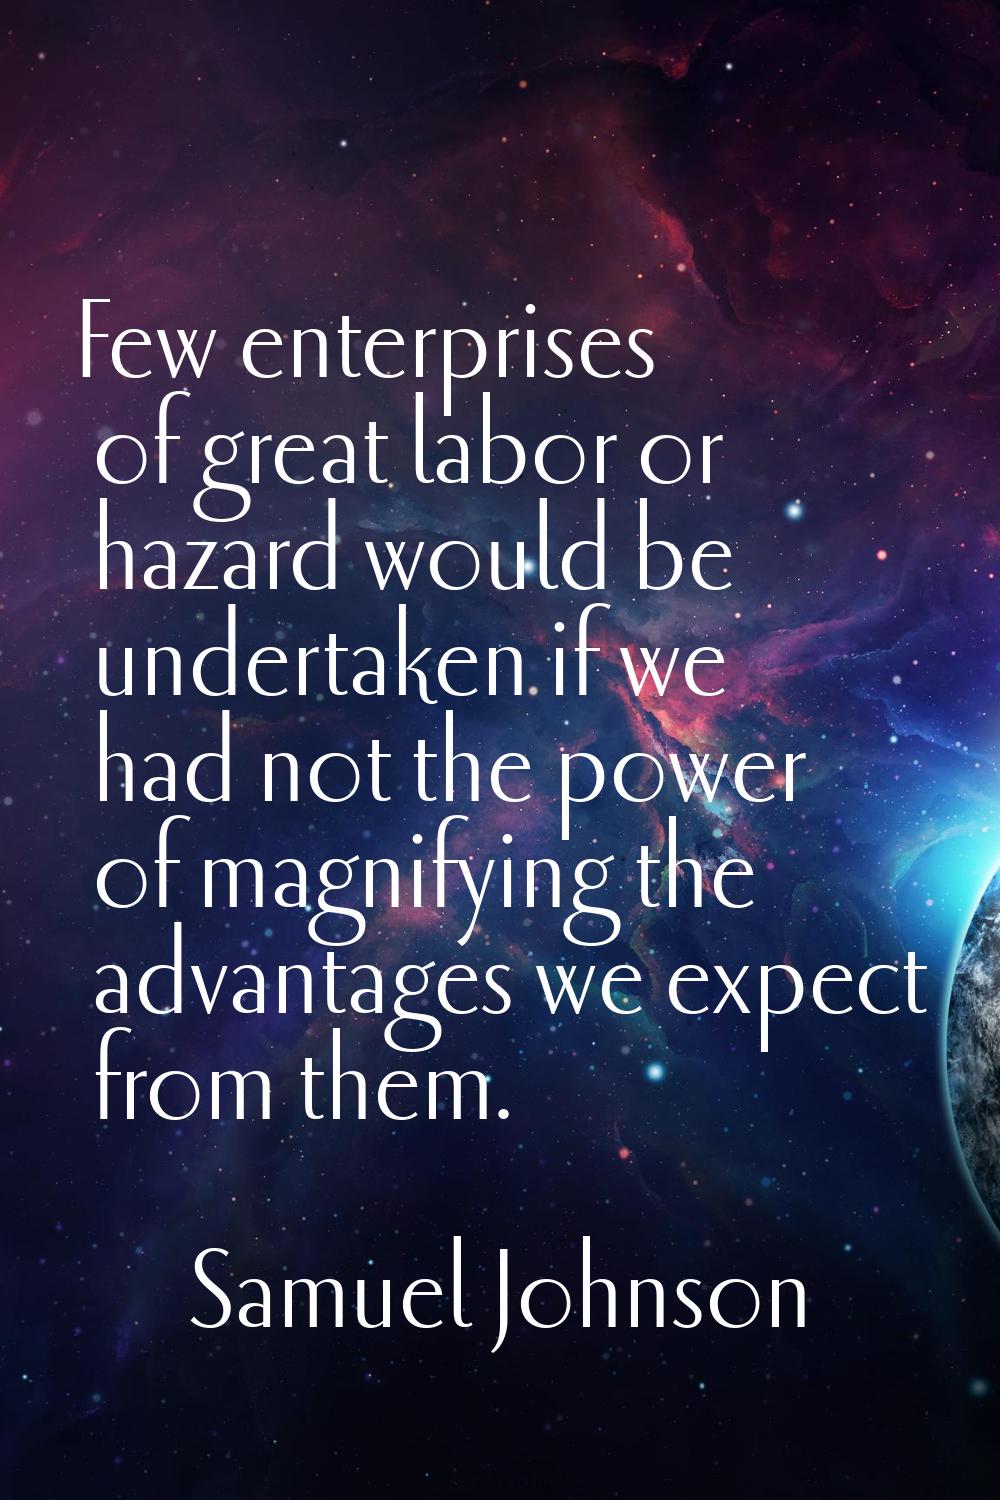 Few enterprises of great labor or hazard would be undertaken if we had not the power of magnifying 